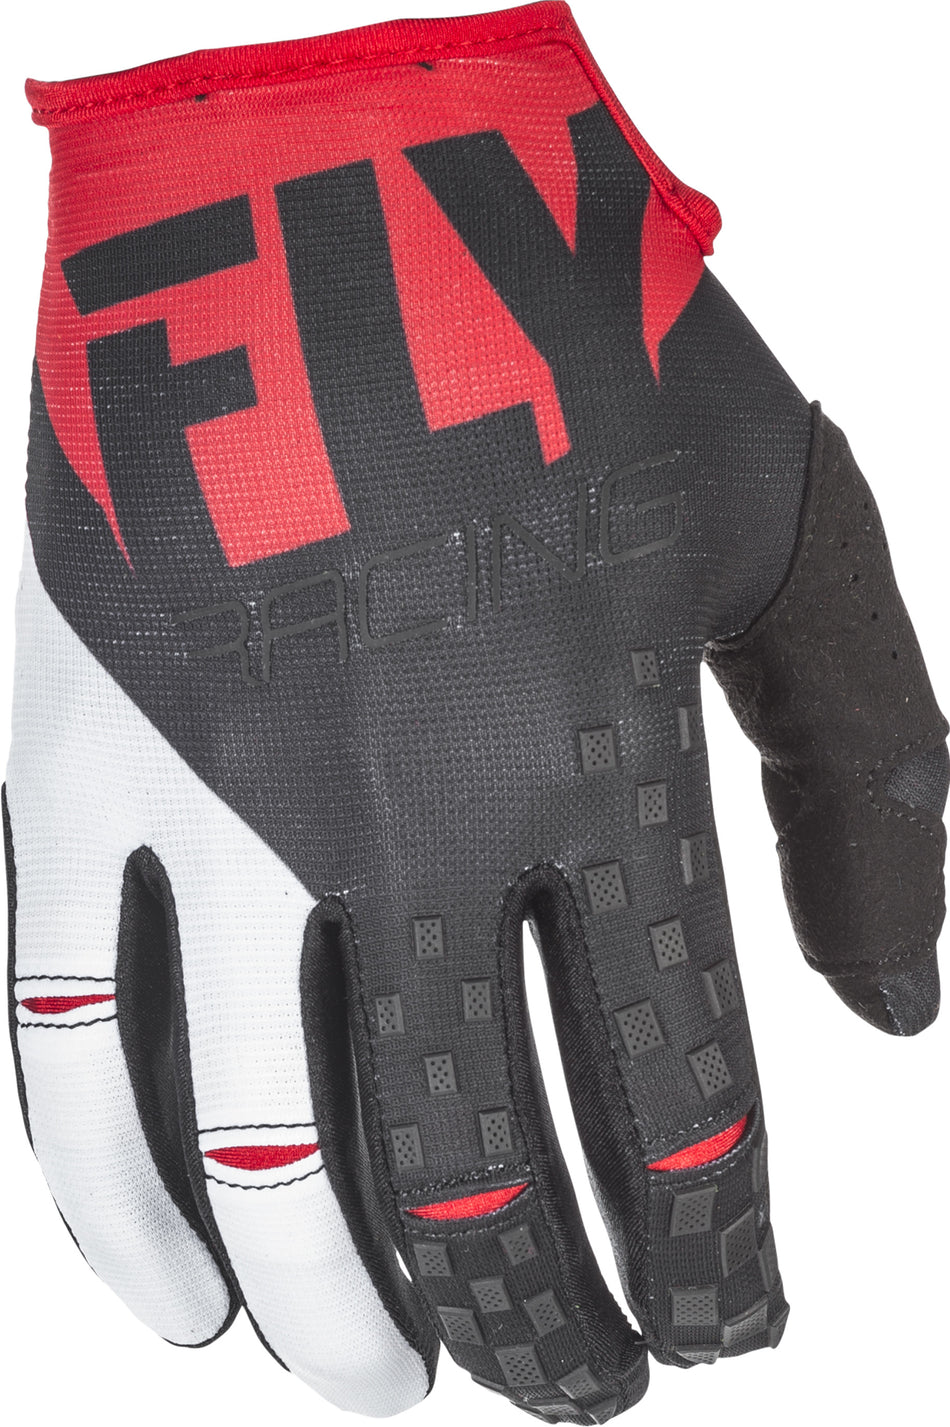 FLY RACING Kinetic Gloves Red/Black Sz 6 371-41206